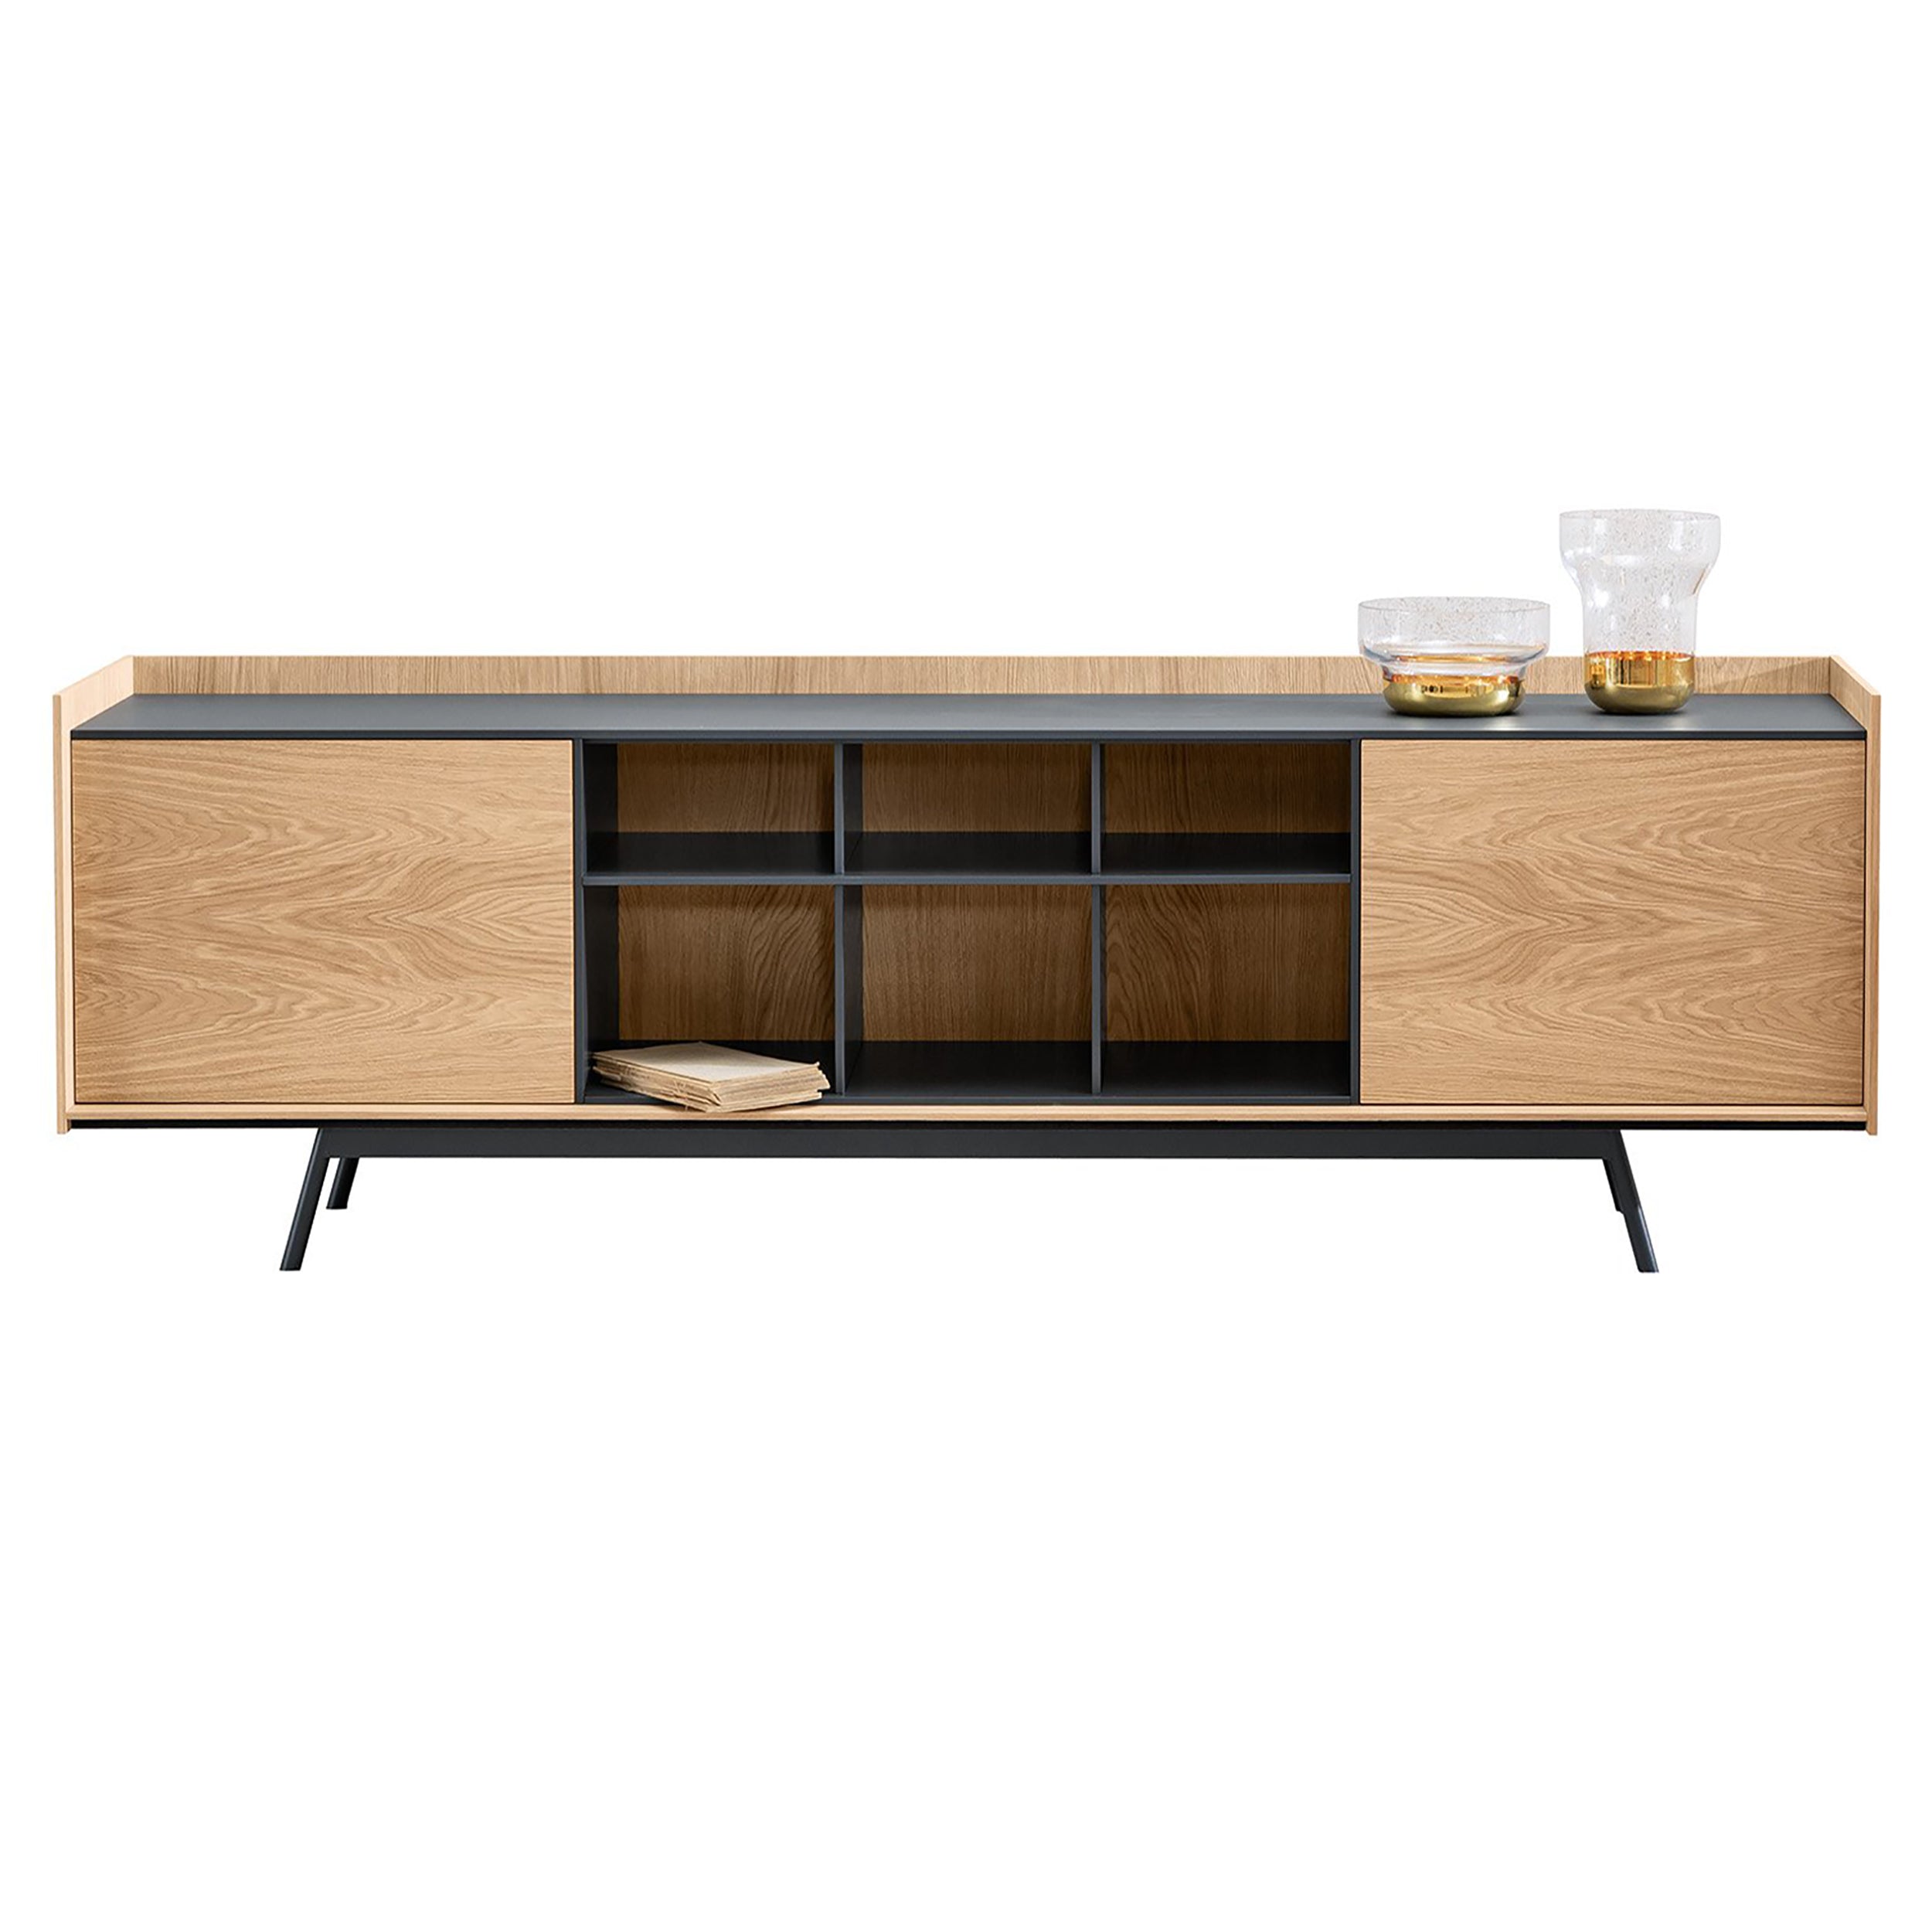 Edge Open Cabinet: Large + Lacquered Anthracite + Lacquered Black + Flamed Oak